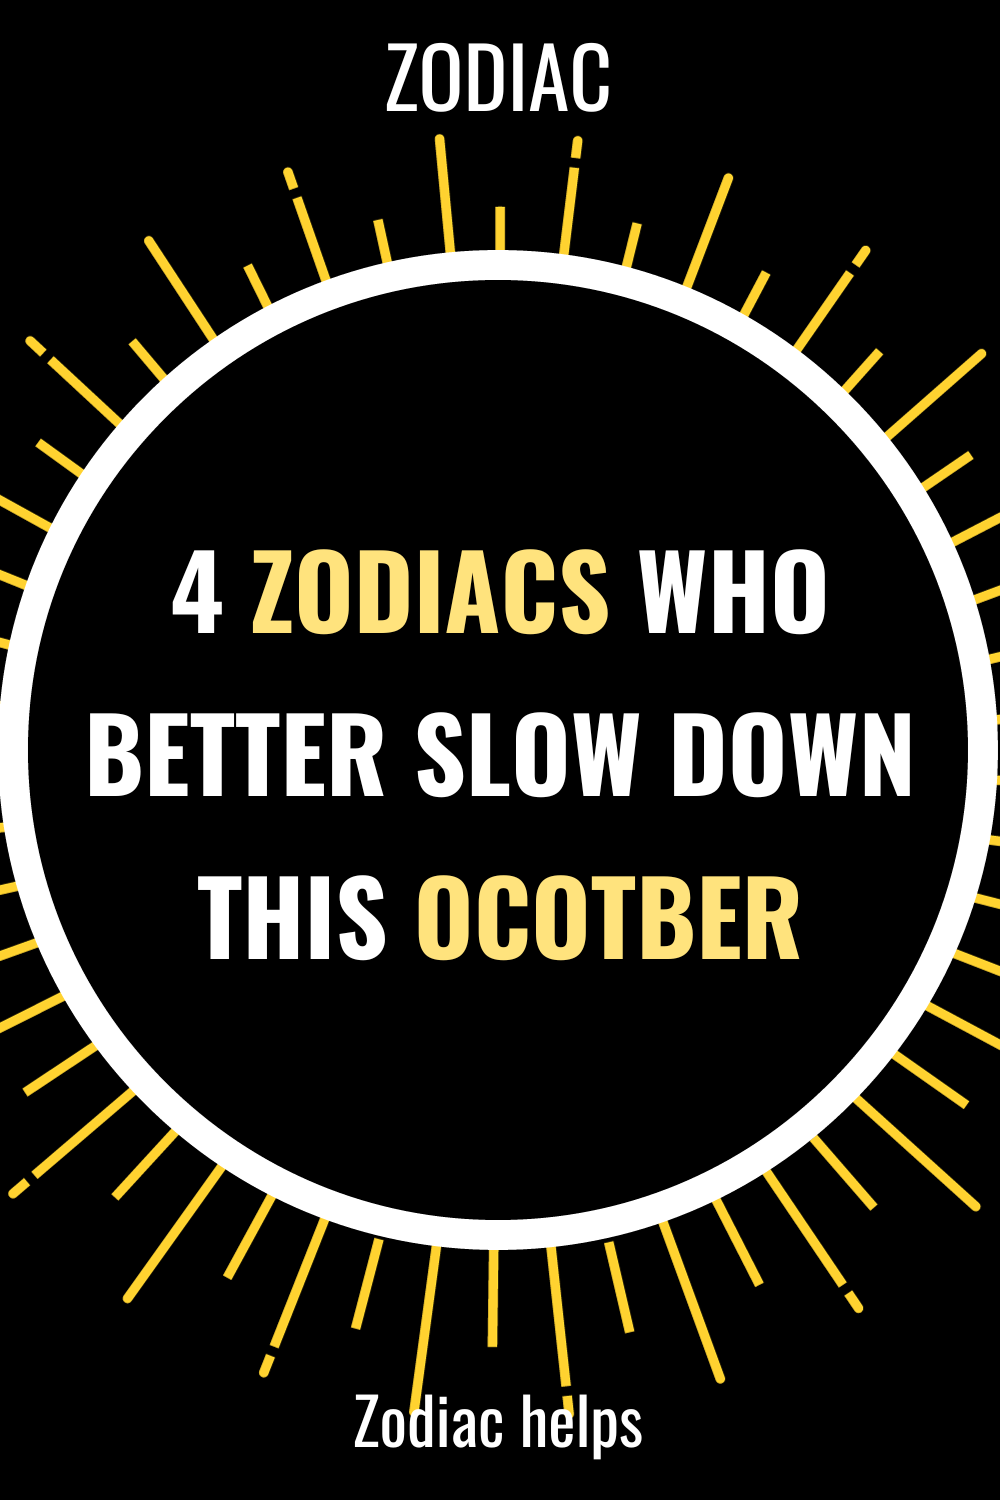 4 Zodiacs Who Better Slow Down This October